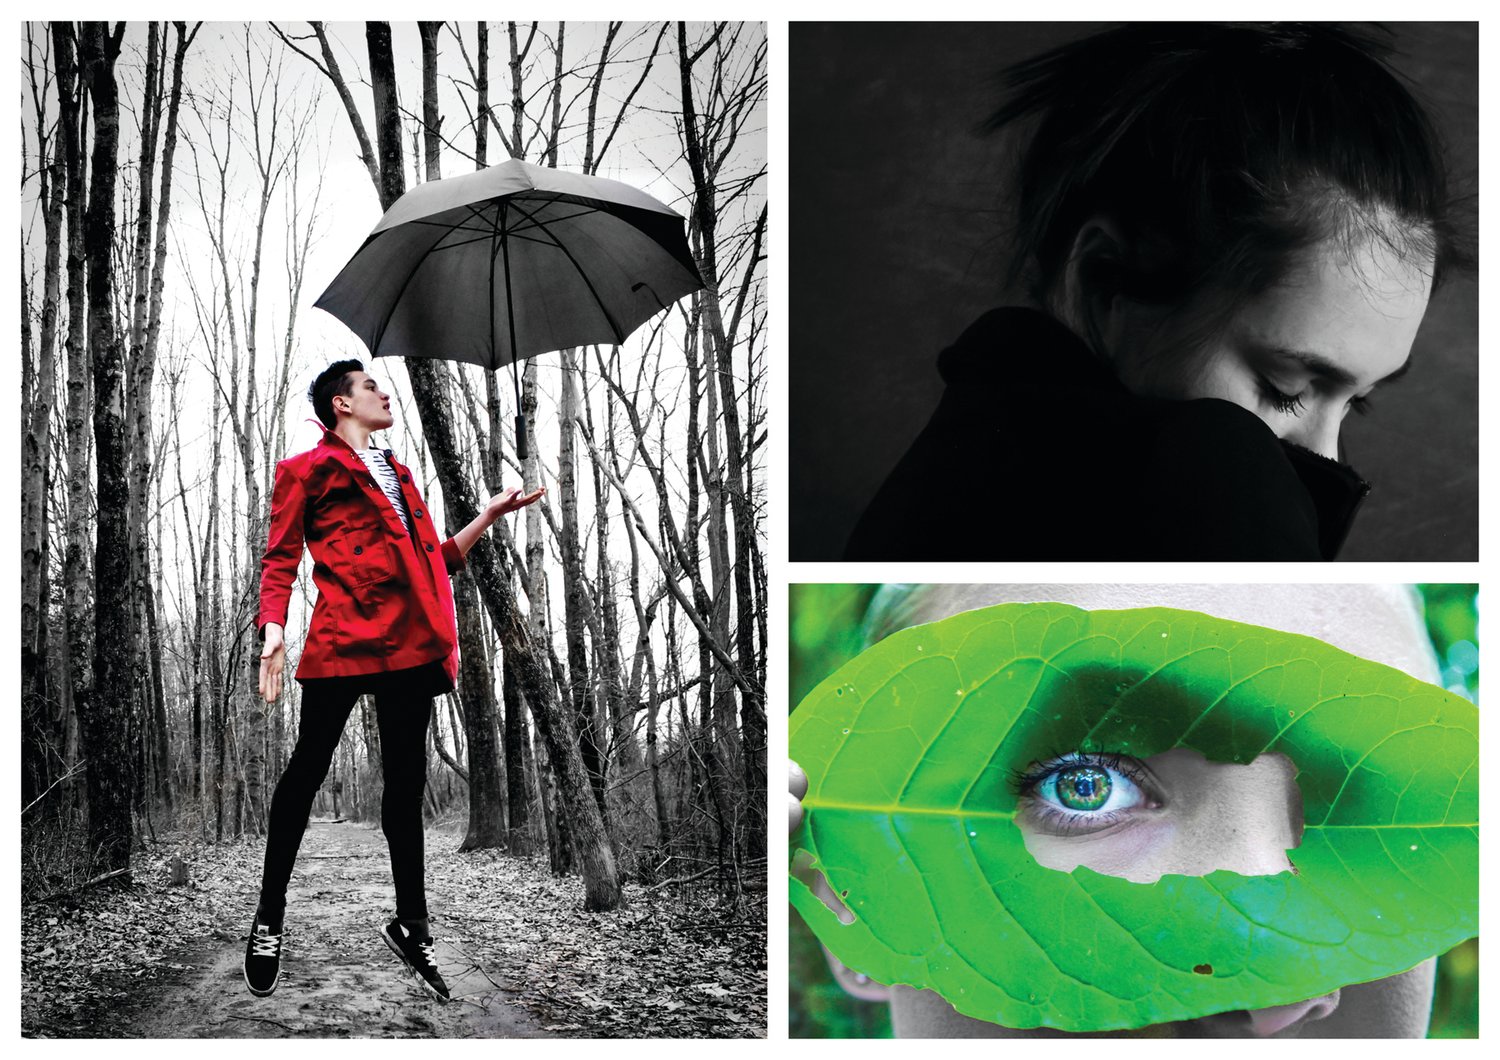 Thai Branowski was his own model for “Into the Woods,” the photograph, left, that won grand prize in the New Jersey Youth Photography Competition. At top right is Alena Graziani’s “Self Portrait” and below that is Skye Bundt’s “Nature’s Eye.”